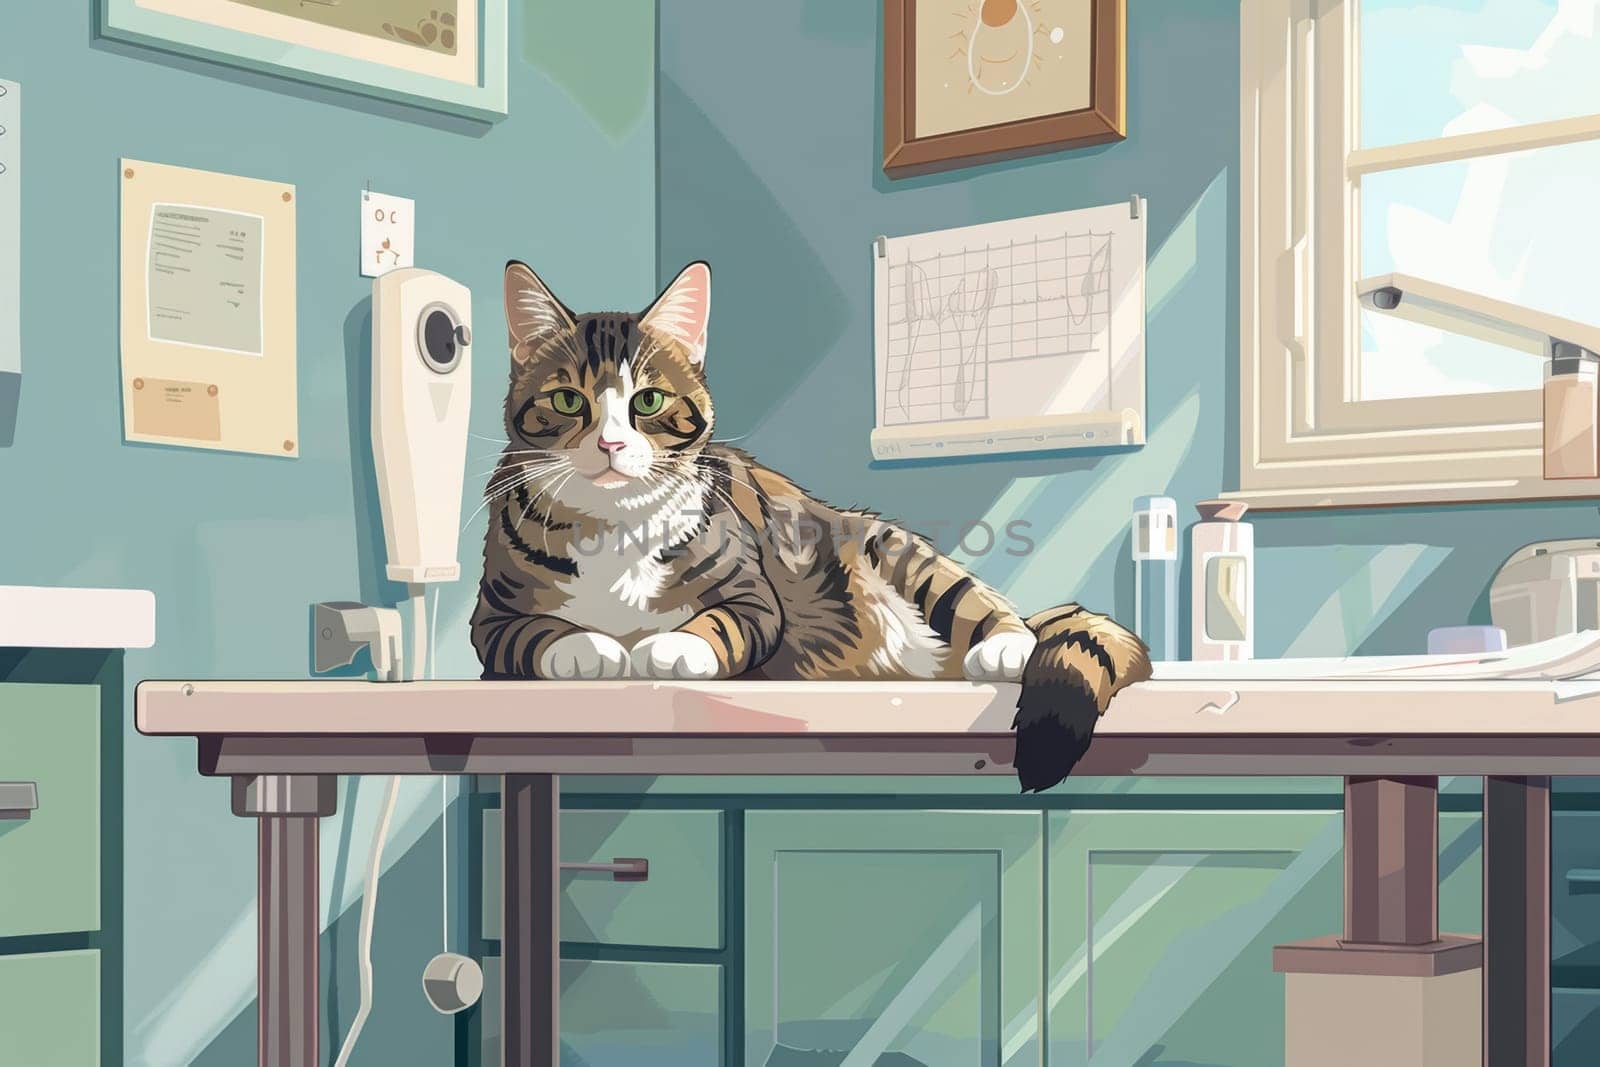 A gentle veterinarian performs a wellness check on a relaxed tabby cat, in a cozy veterinary clinic, illustrating the bond between pets and caregivers